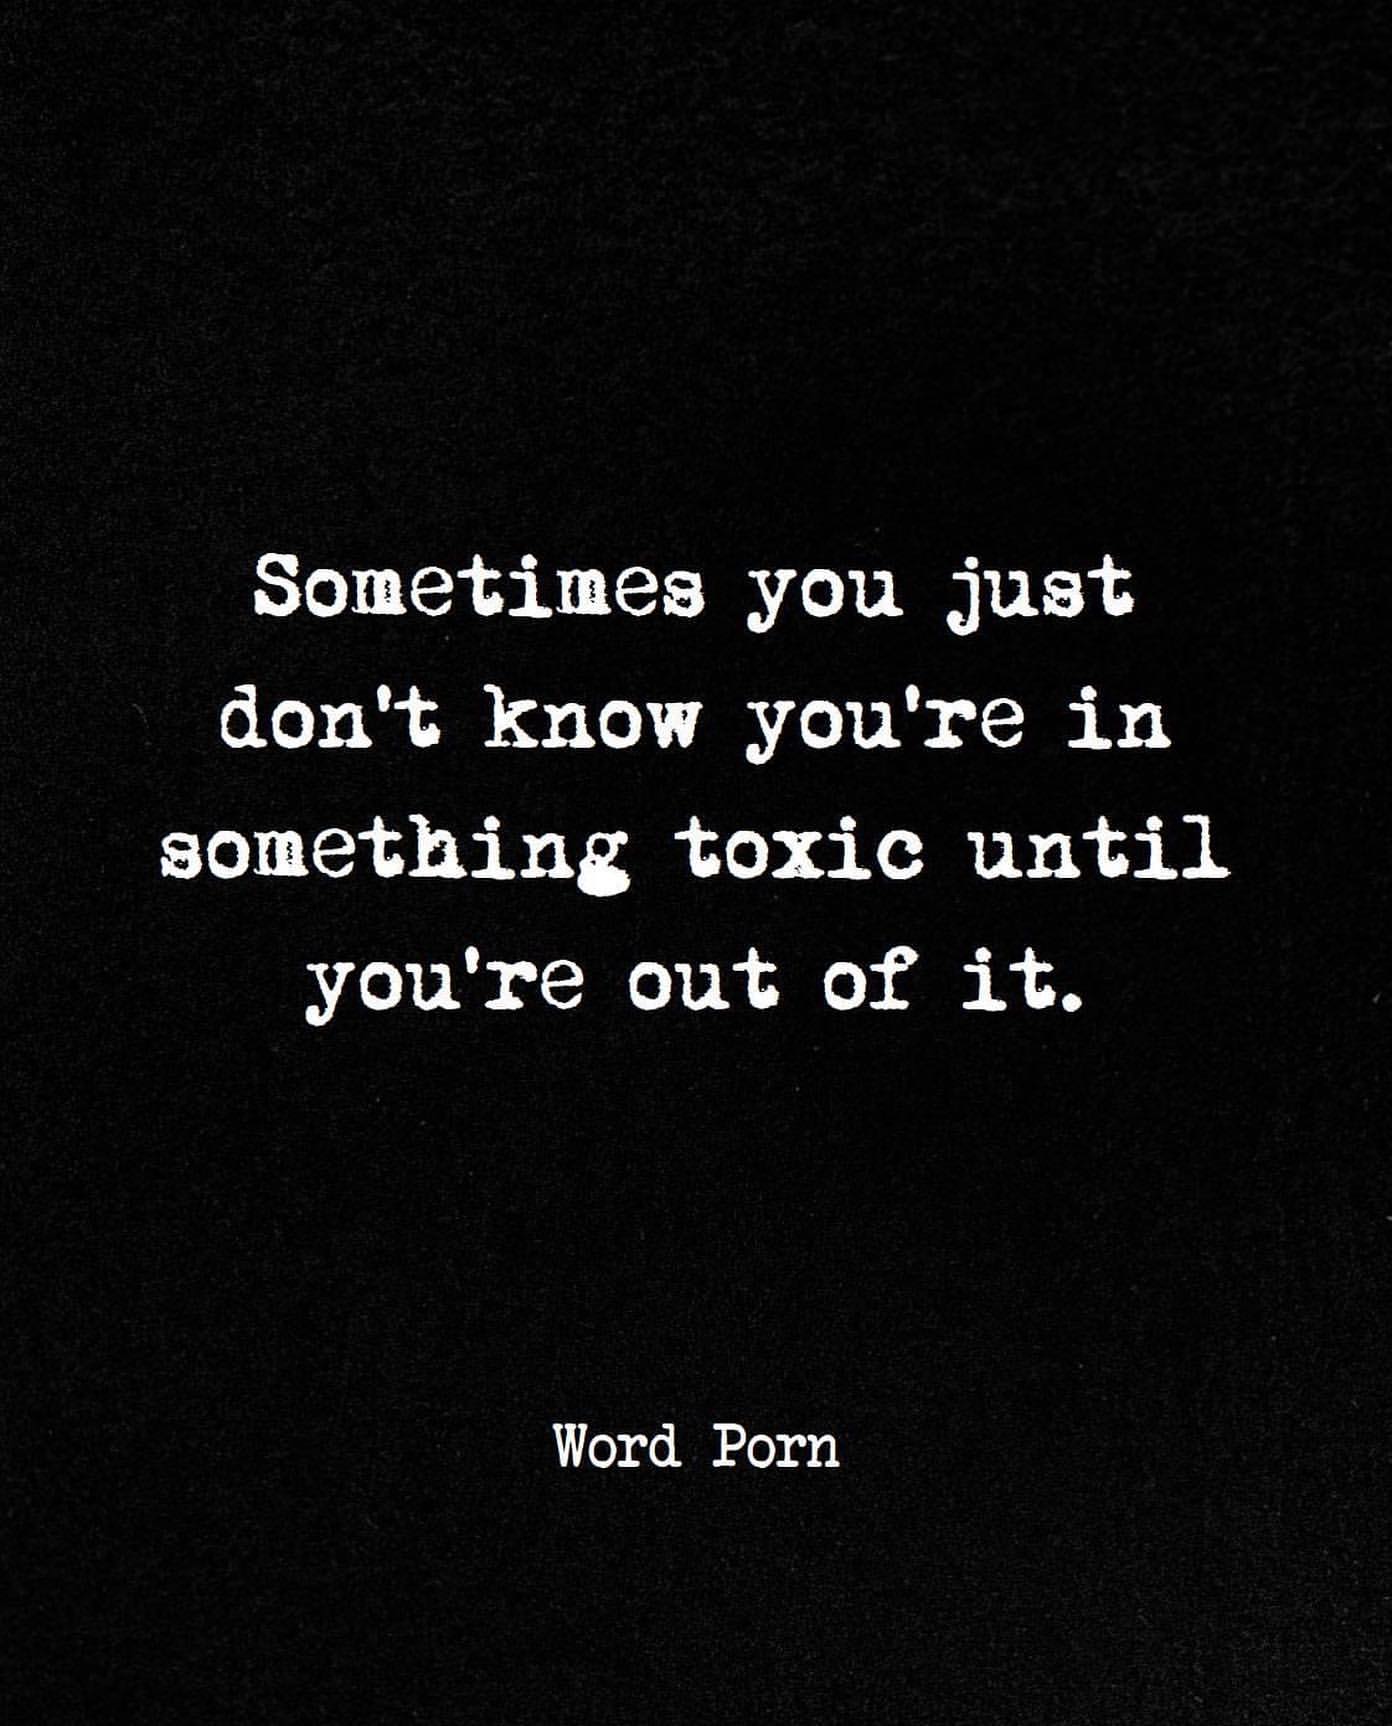 Sometimes you just don't know you're in something toxic until you're out of it.